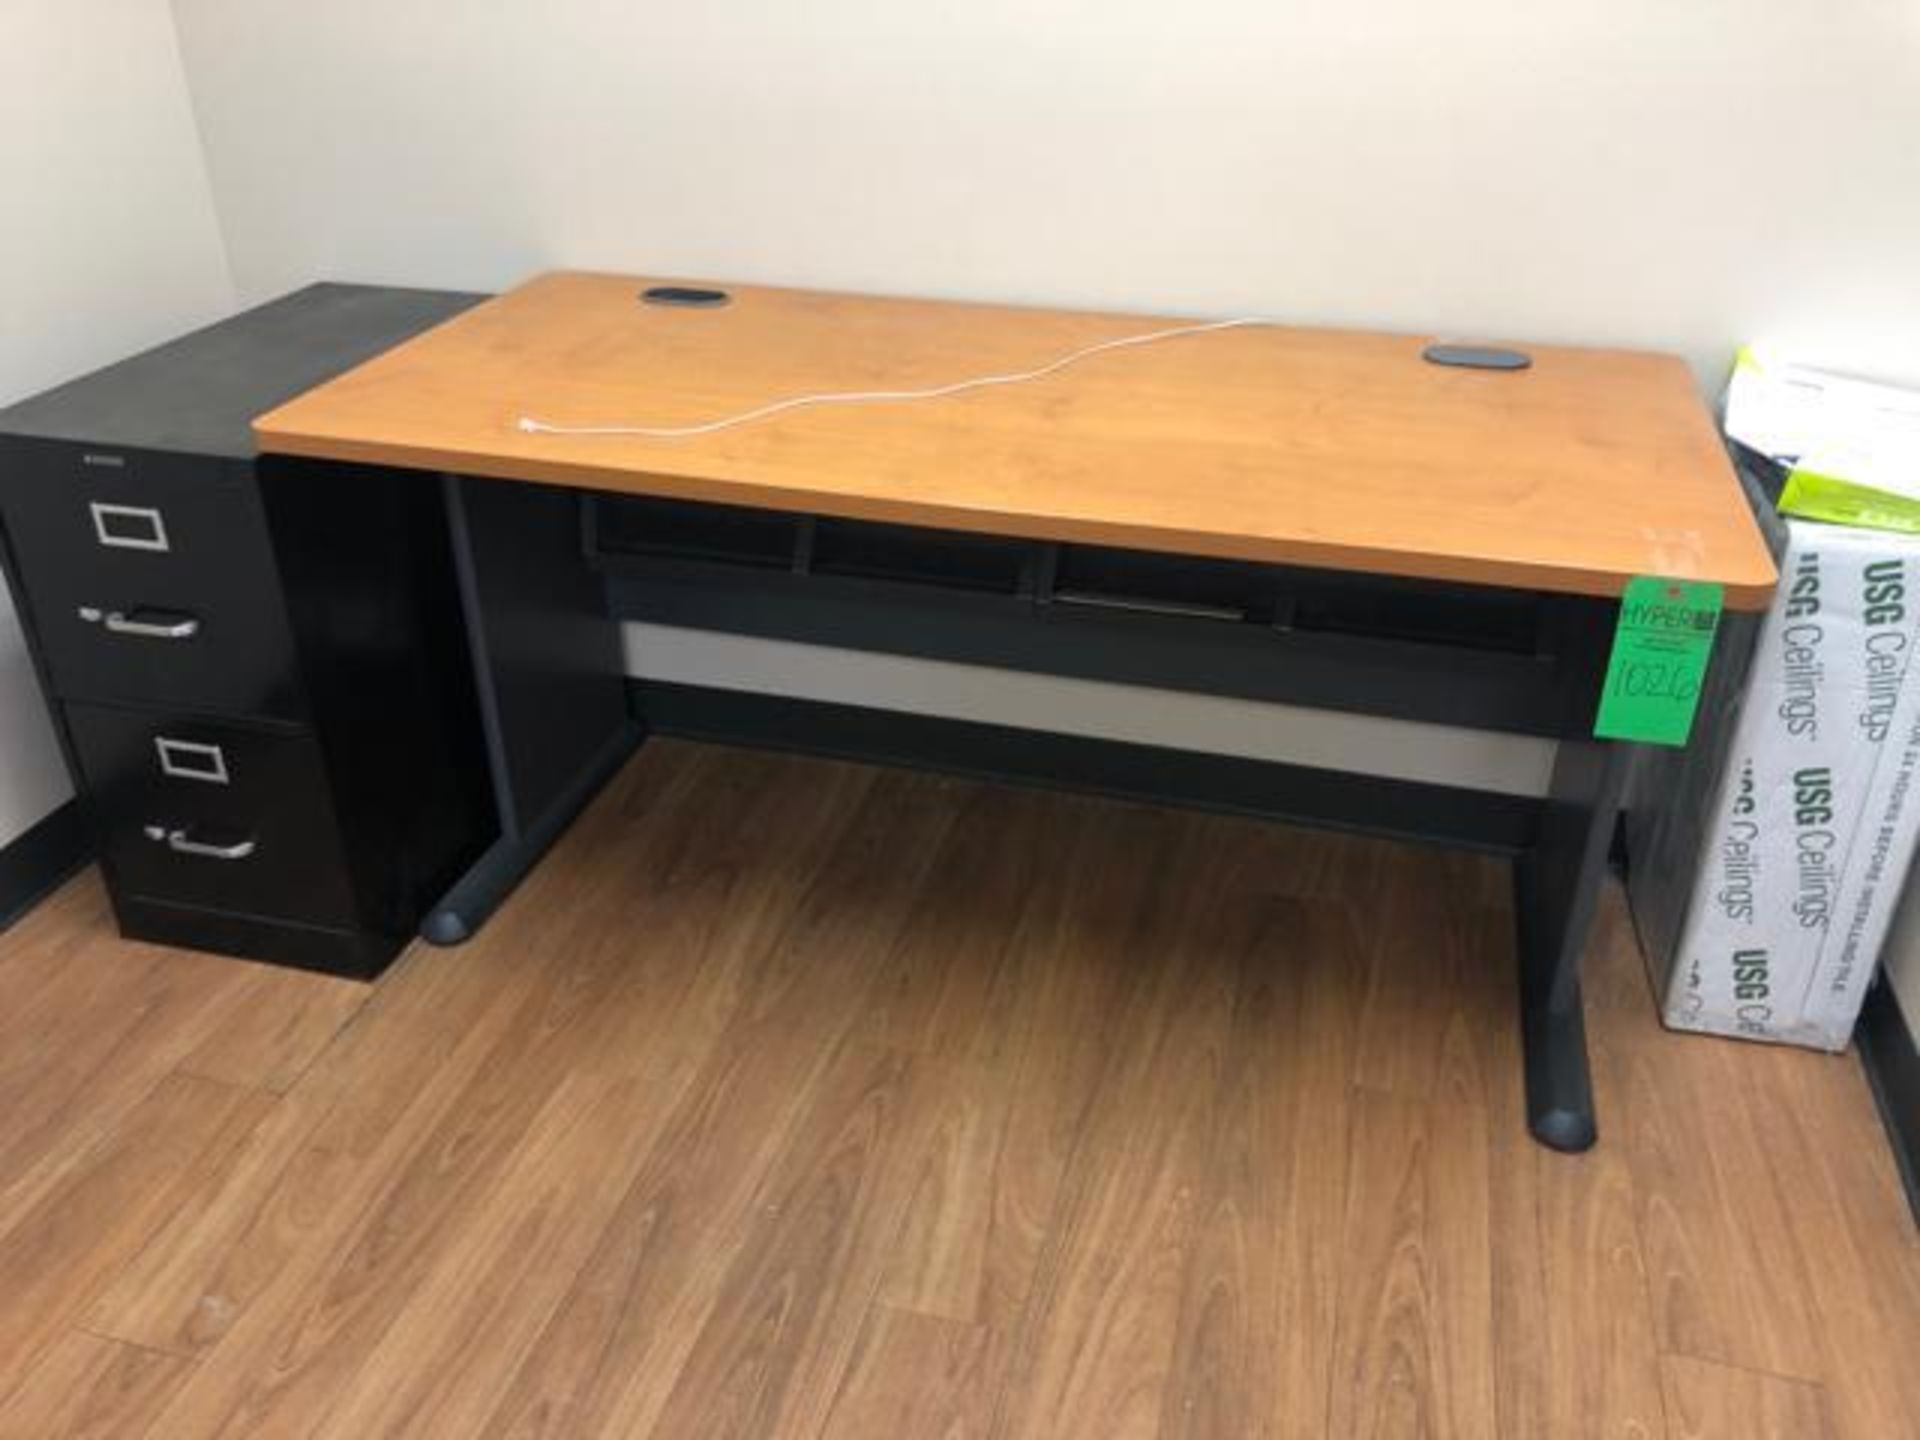 Office Furniture,To include: (1) Wood Top Office Desk with Metal Base 60" x 27"x 30"; (1) Tennsco 2